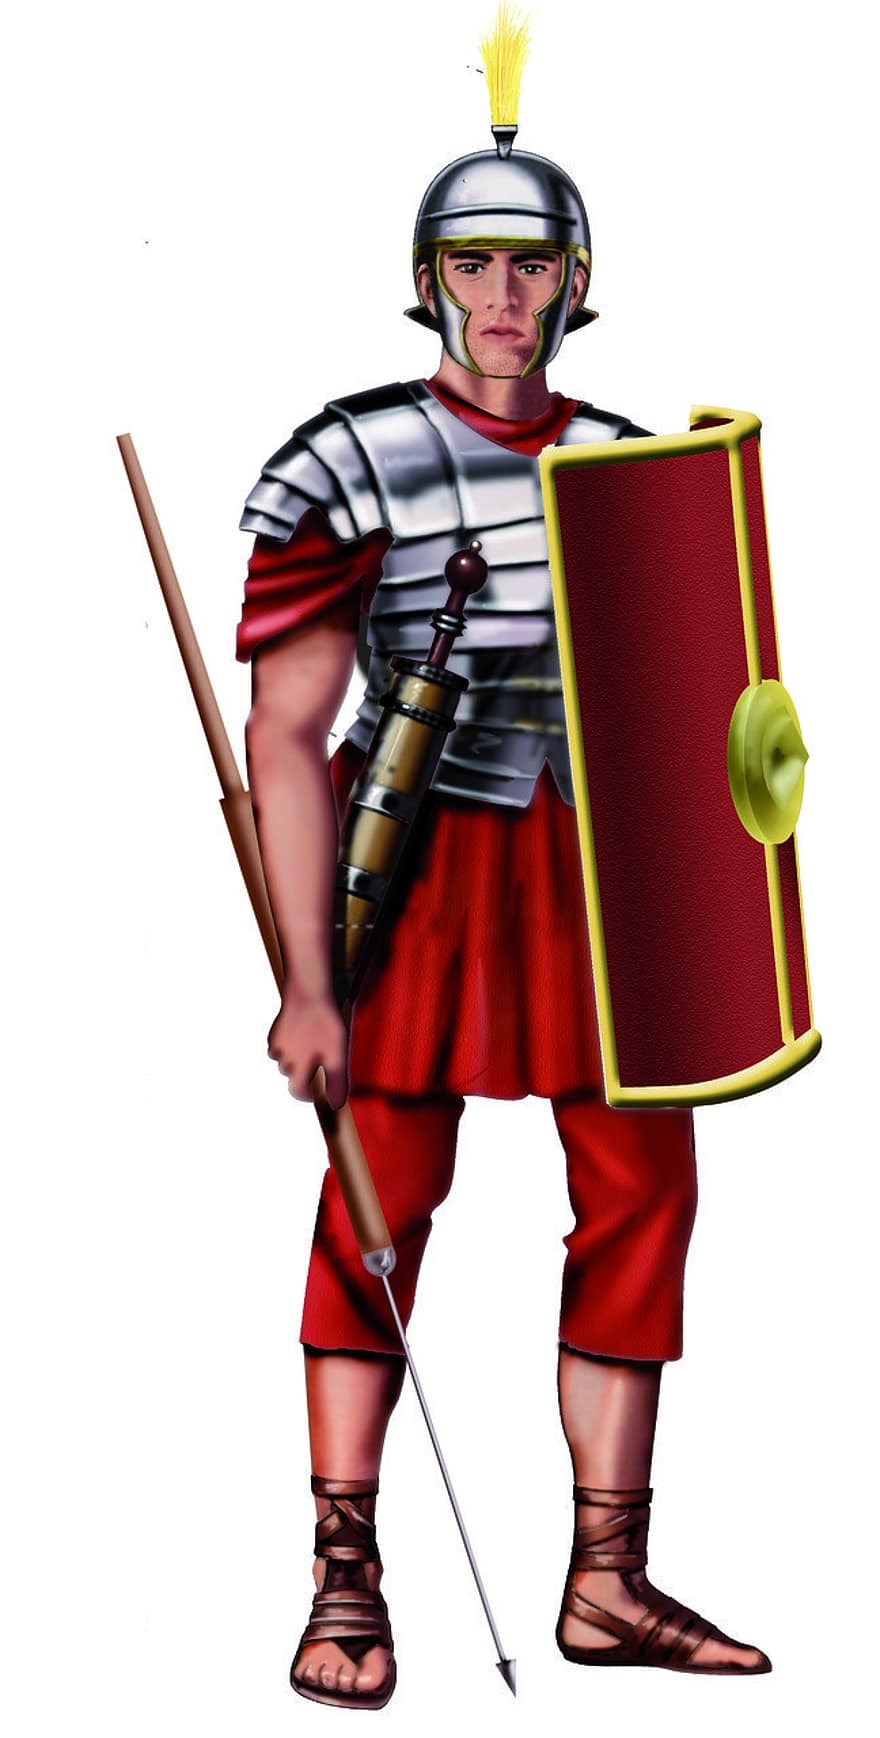 Roman soldiers used shield to protect themselves against enemies' arrows and spears.